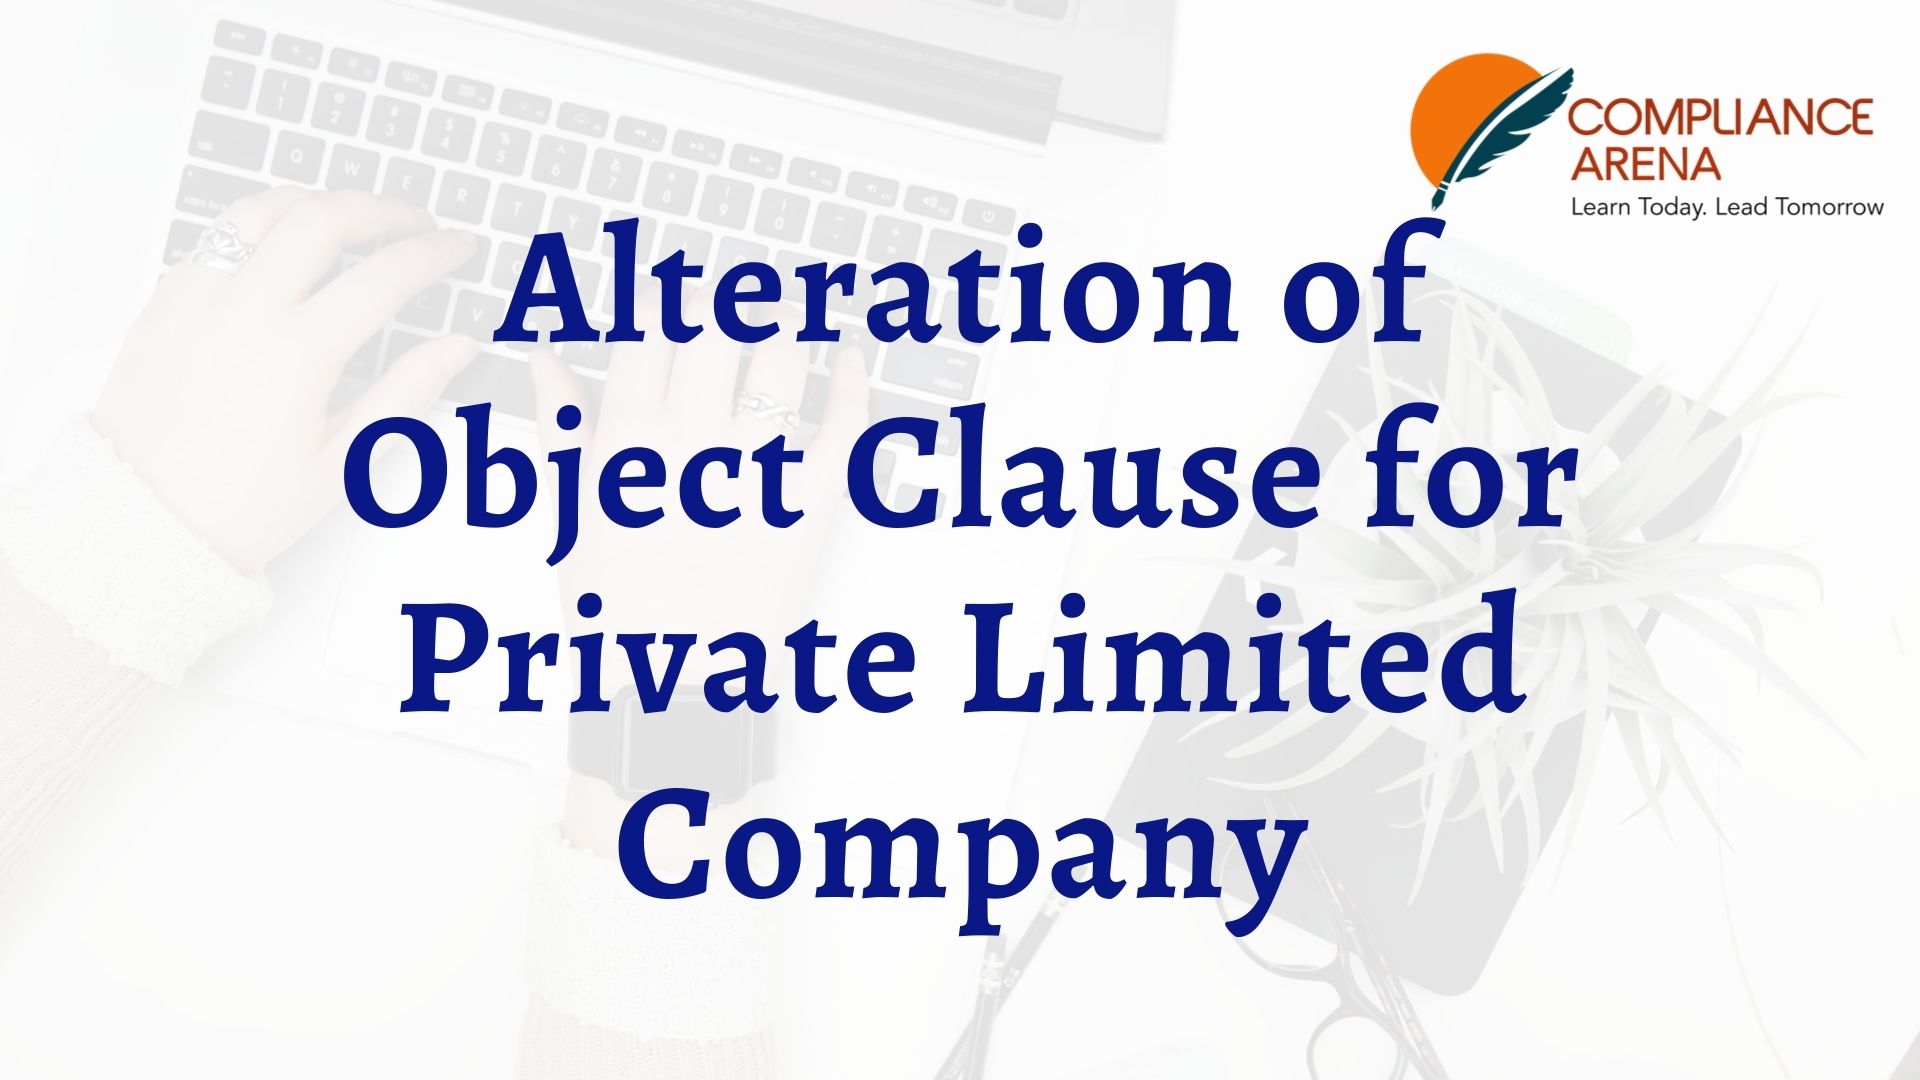 Alteration of Object Clause for Private Limited Company